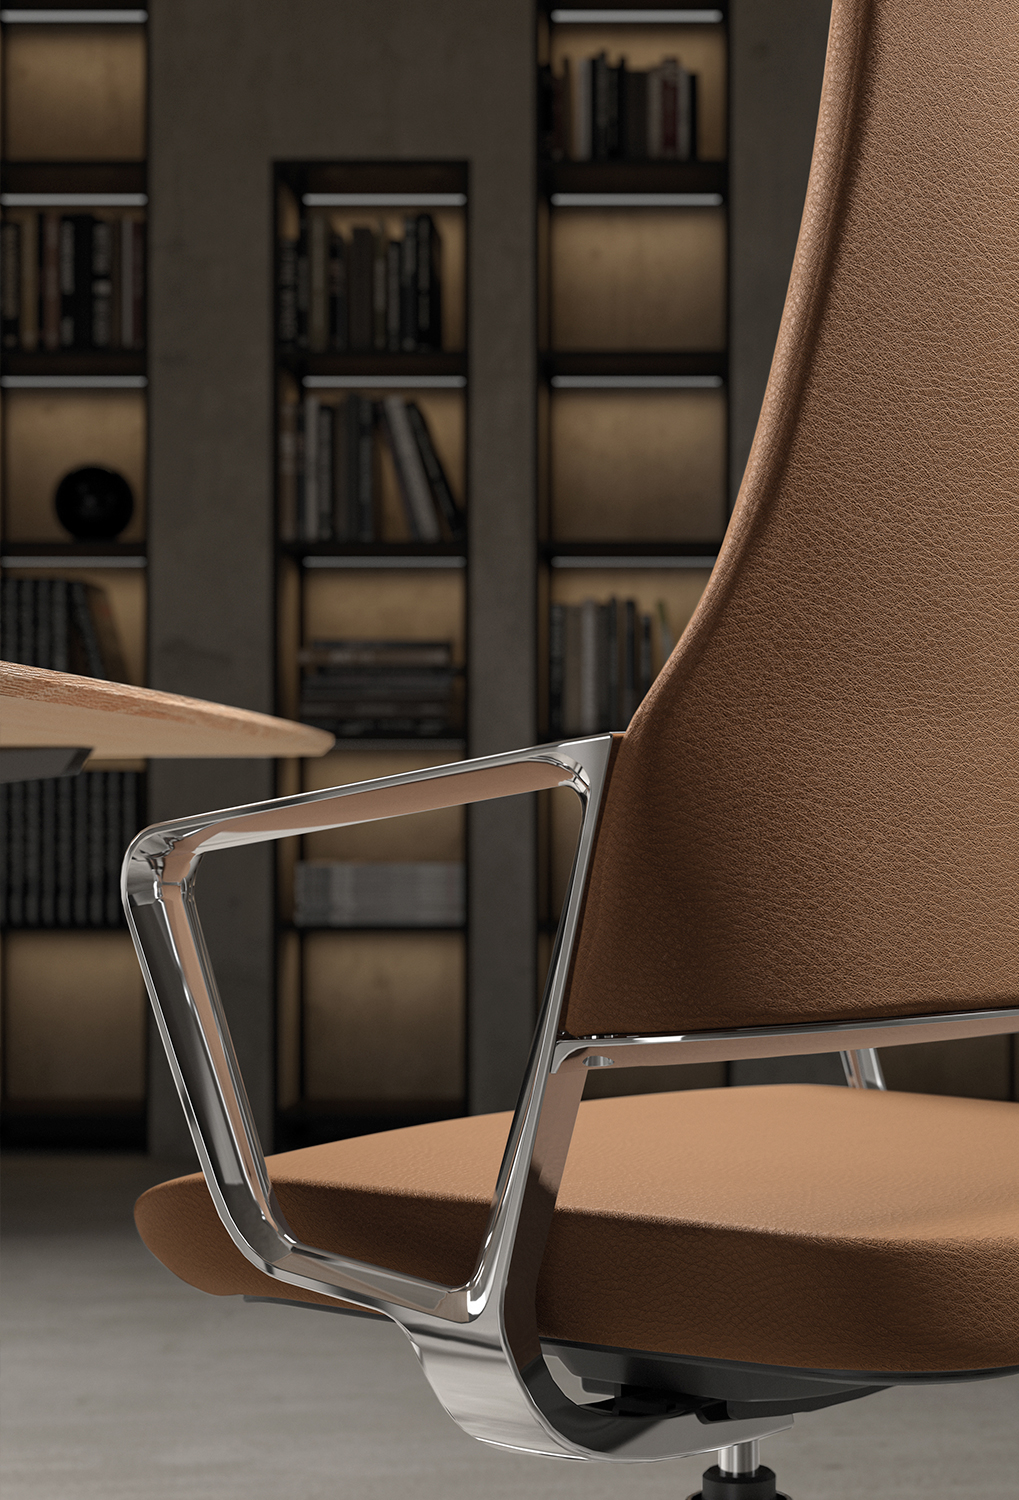 That's it - designed chair by Quinti